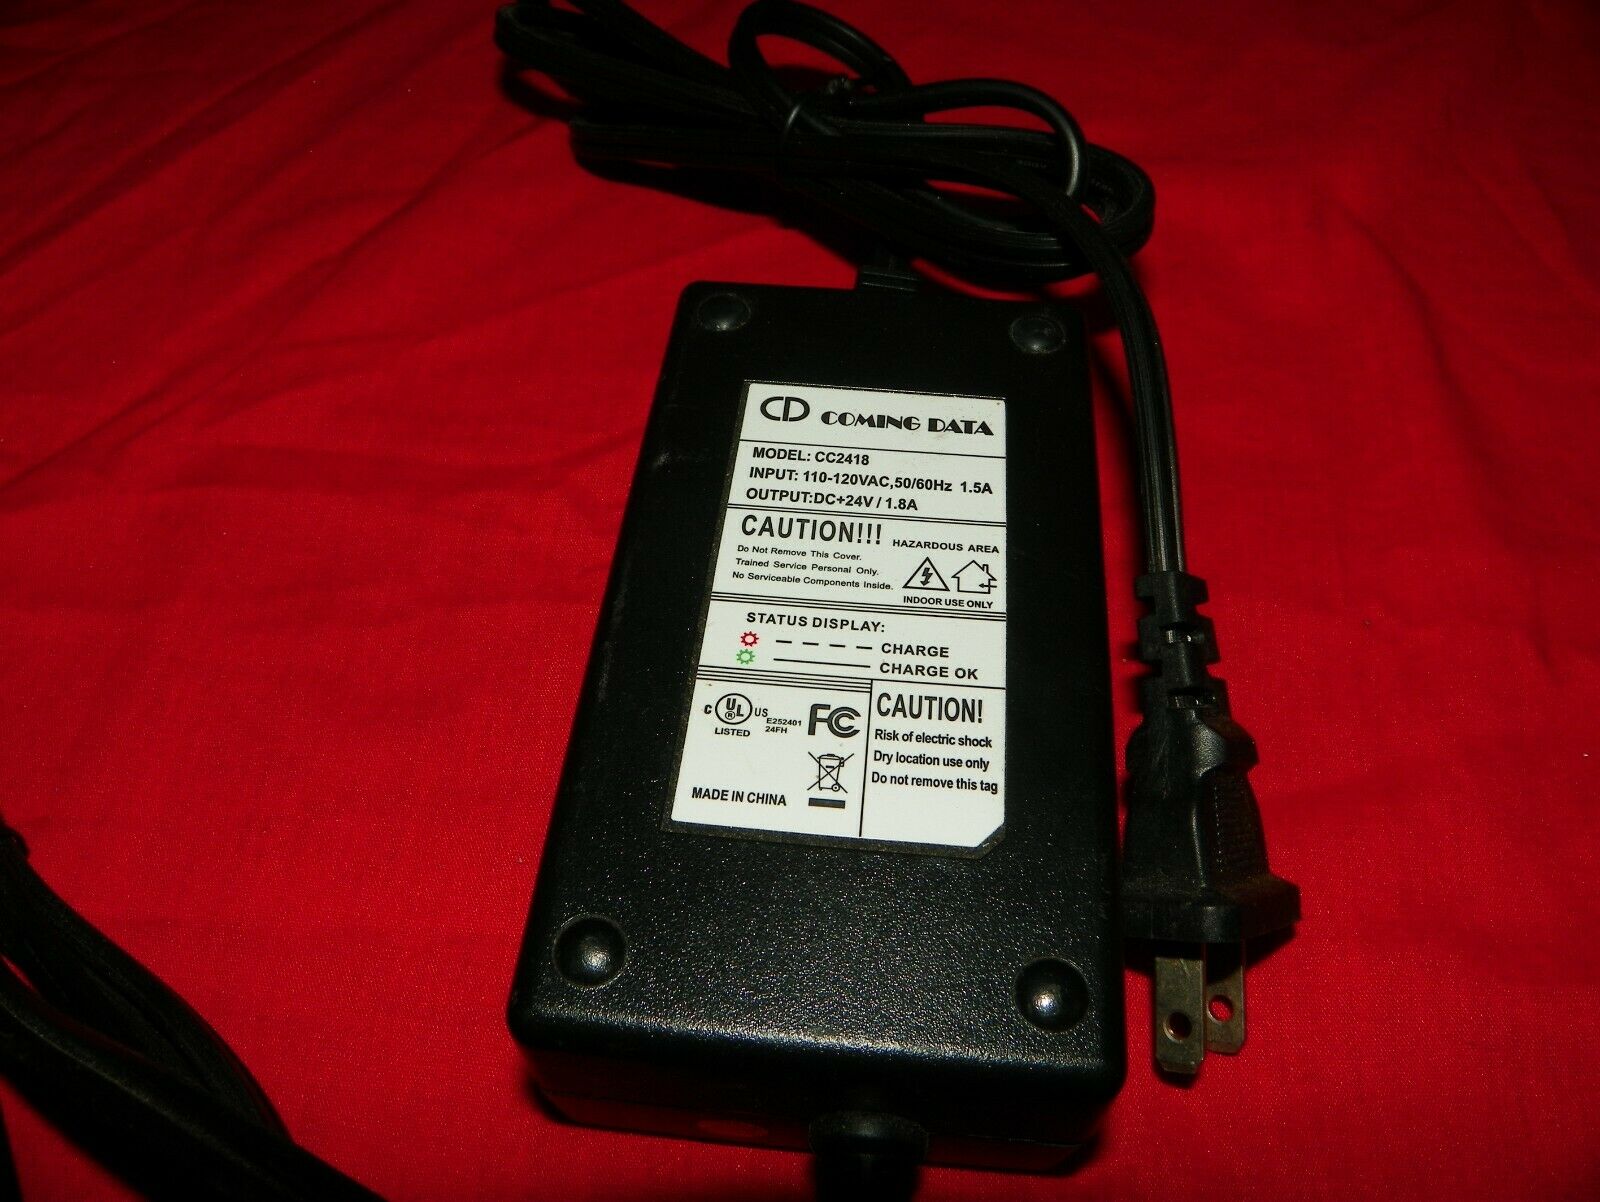 CD COMING DATA Power Adapter Charger CC2418, Output 24V 1.8A (BARREL TIP) Type: Adapter Features: new Output Volta